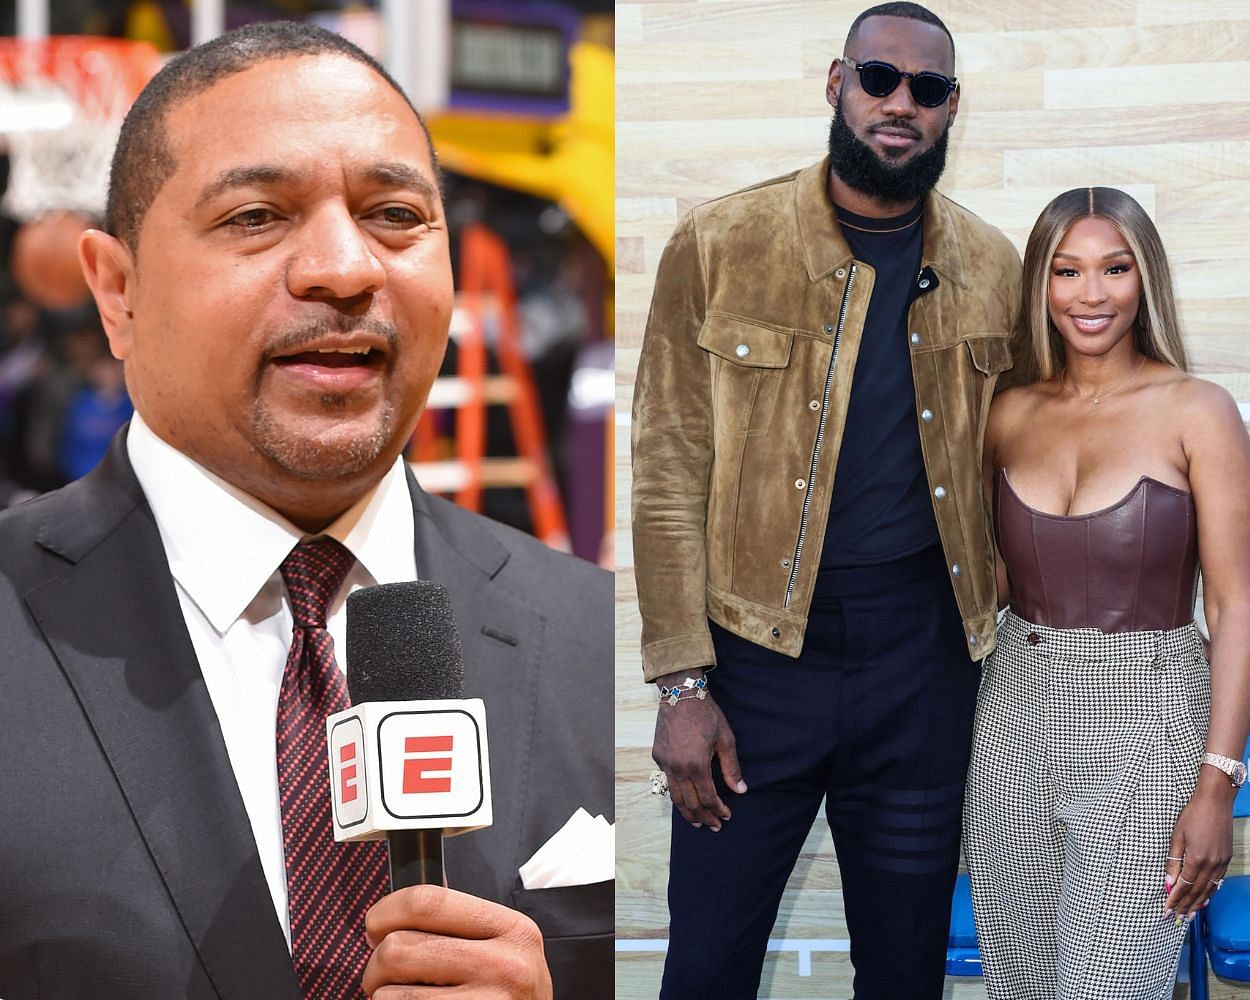 Mark Jackson making questionable remarks about Savannah James